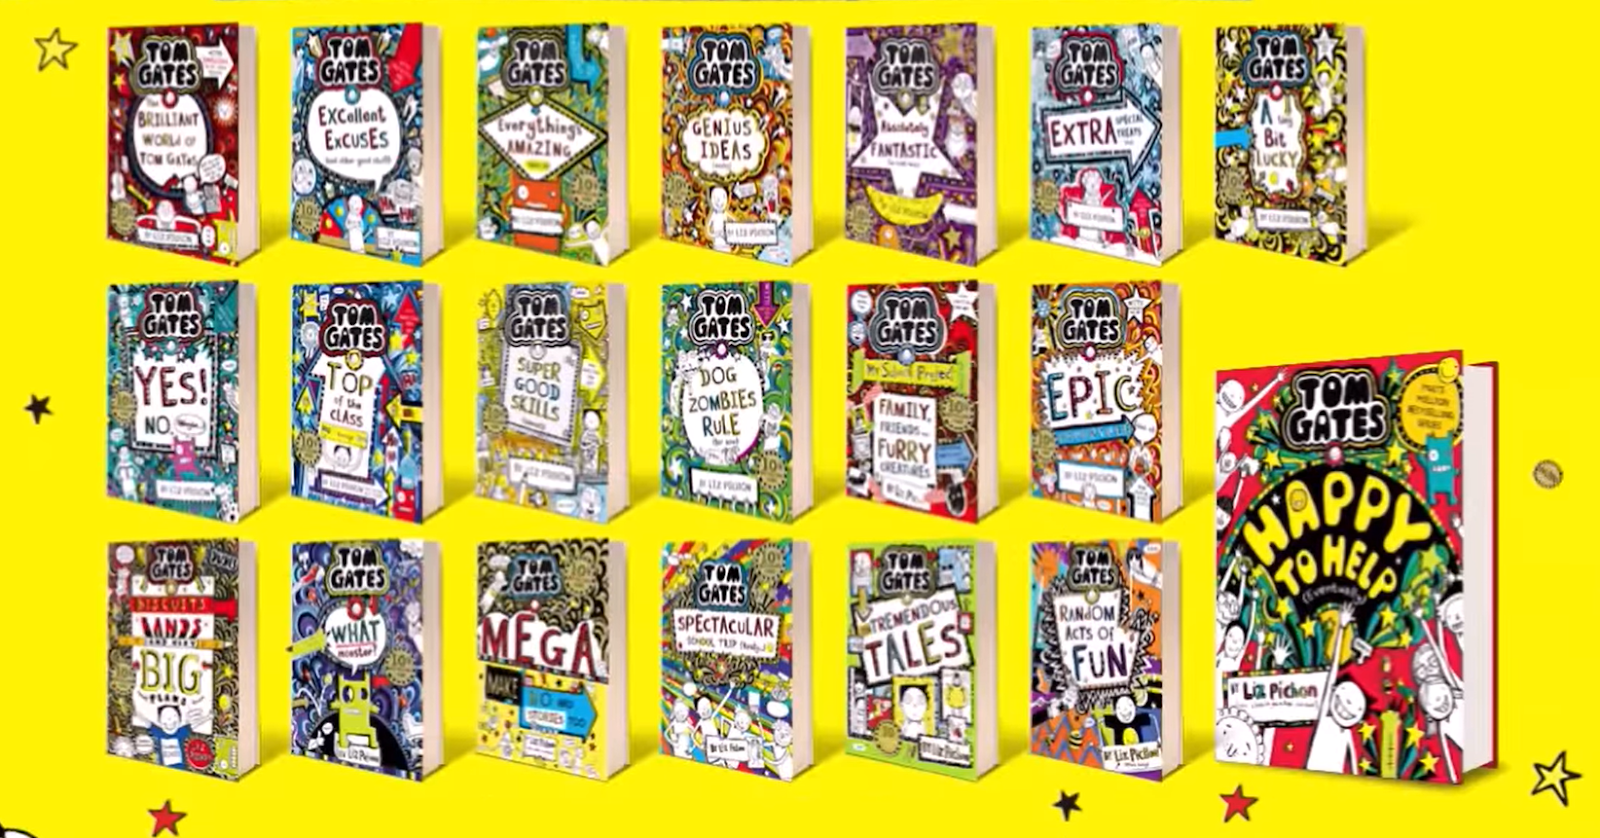 Tom Gates all books titles on yellow background